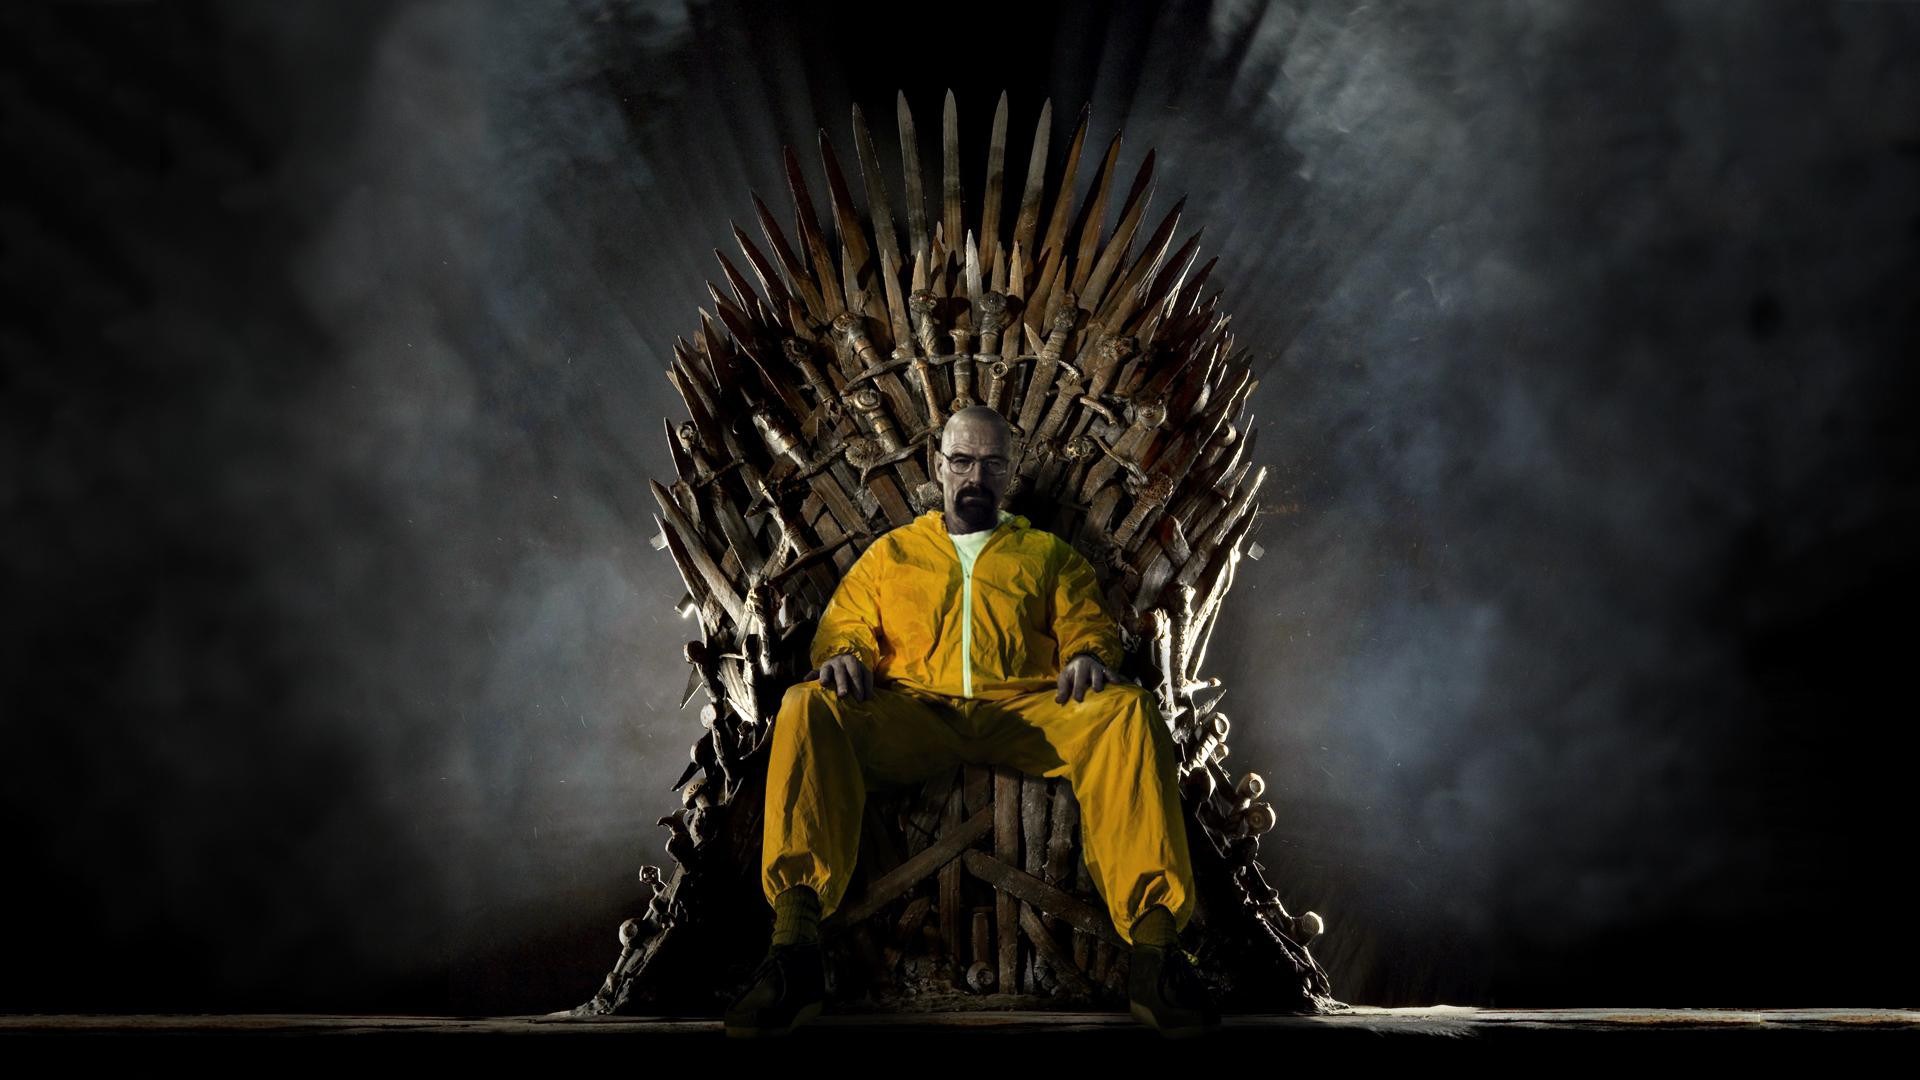 Walter White On The Iron Throne Wallpaper Breaking Bad X Game Of